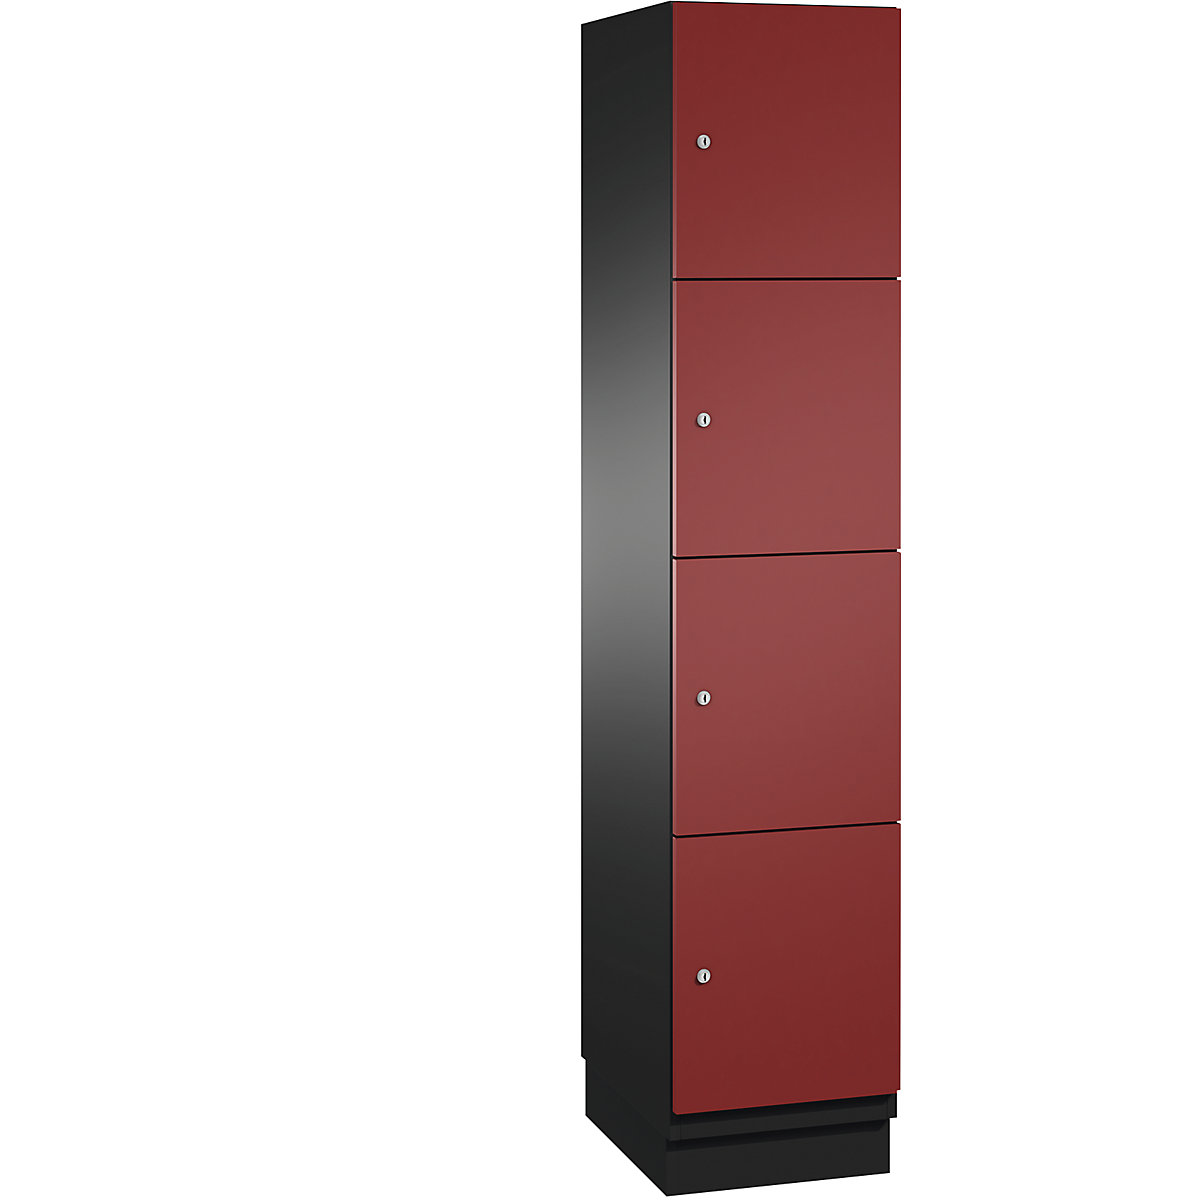 CAMBIO compartment locker with sheet steel doors – C+P, 4 compartments, width 400 mm, body black grey / door ruby red-5